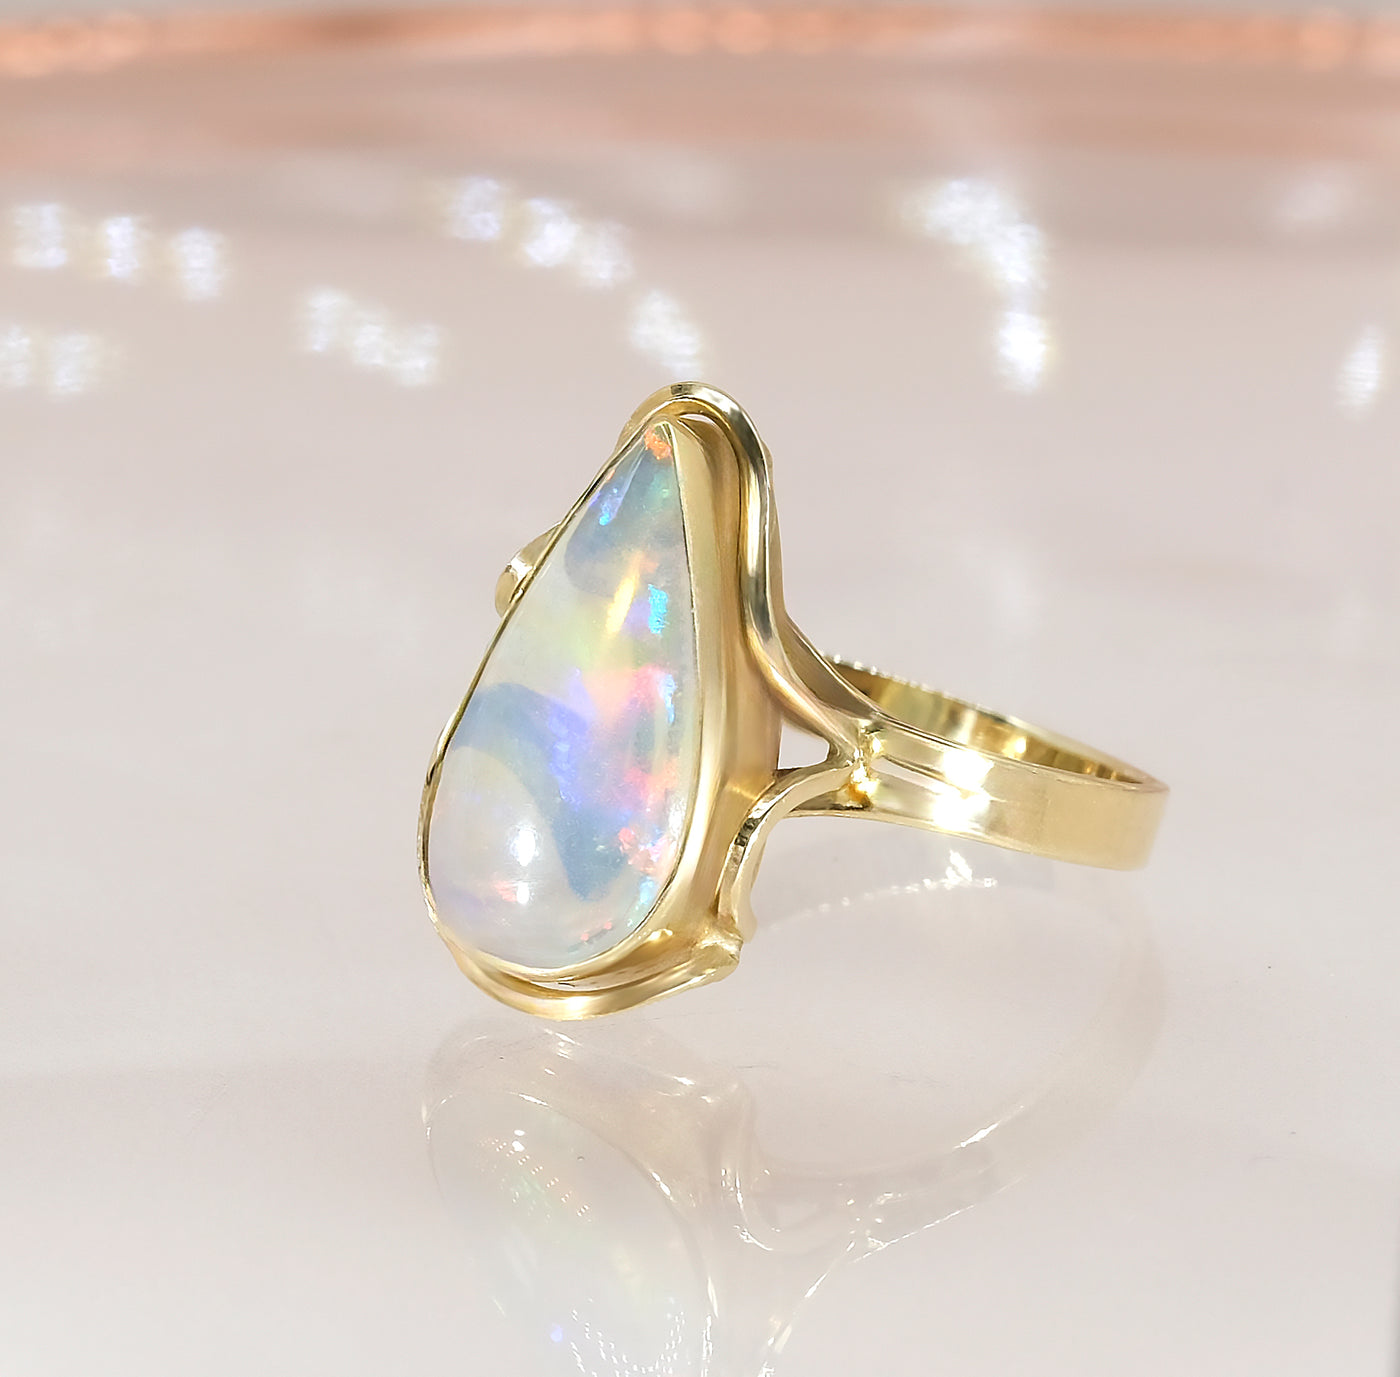 14K Yellow Gold Solid Crystal Opal Ring